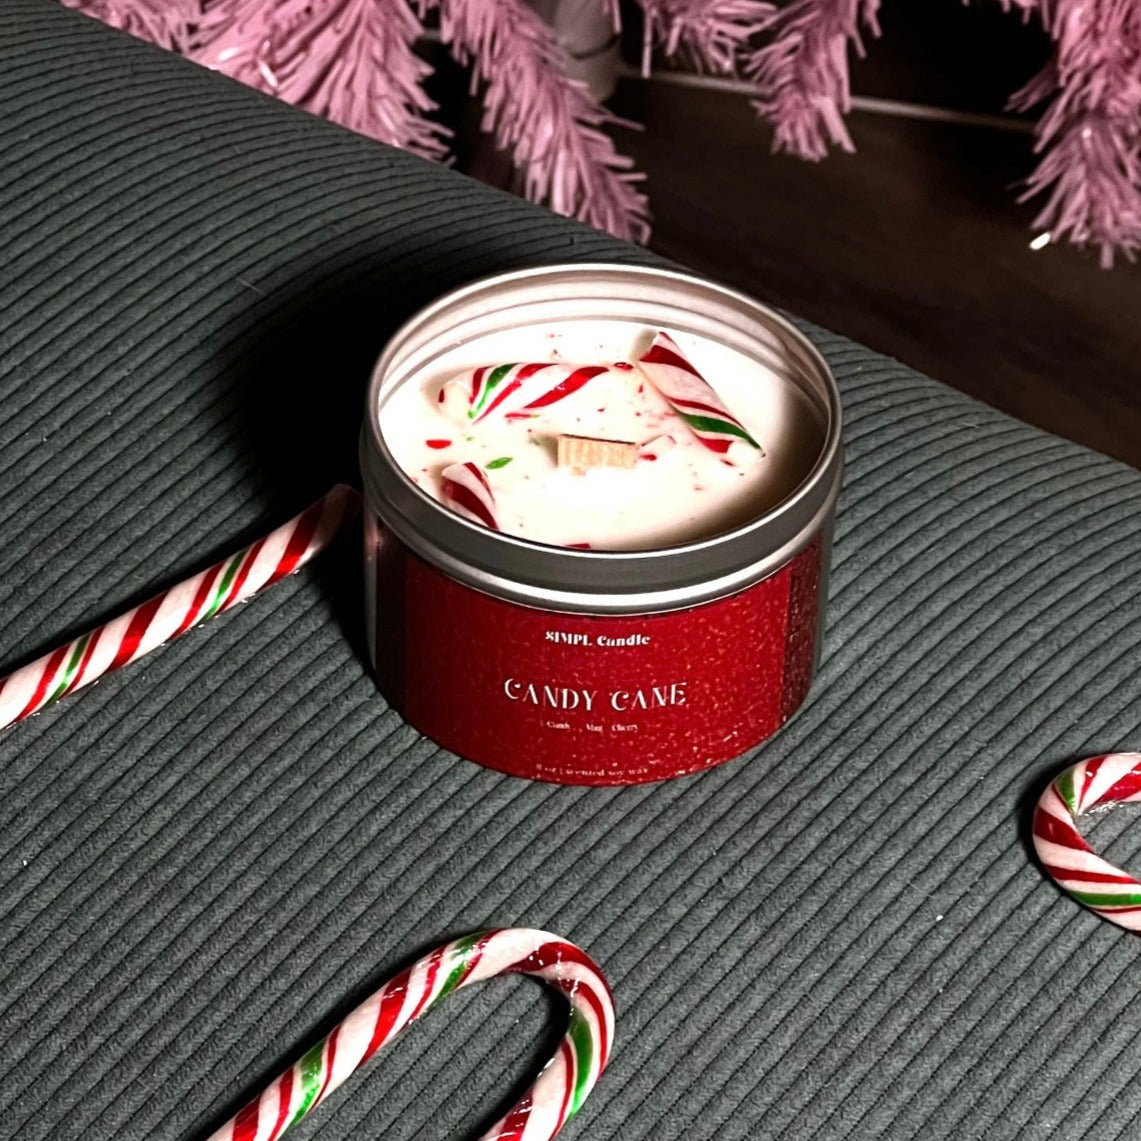 Candy Cane | Candy + Mint + Cherry